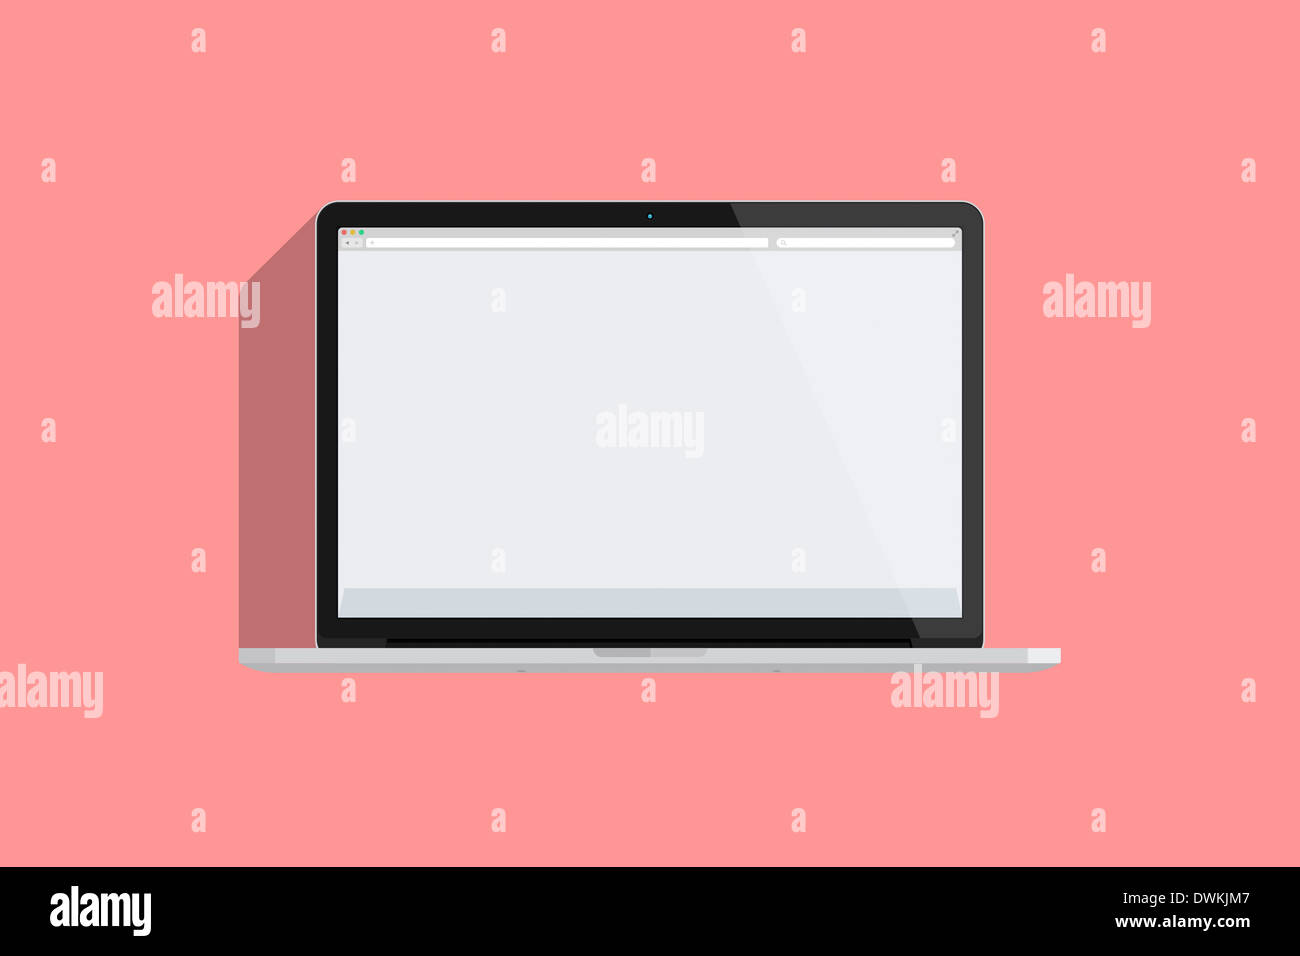 Illustration of a mac book, colored background. Stock Photo